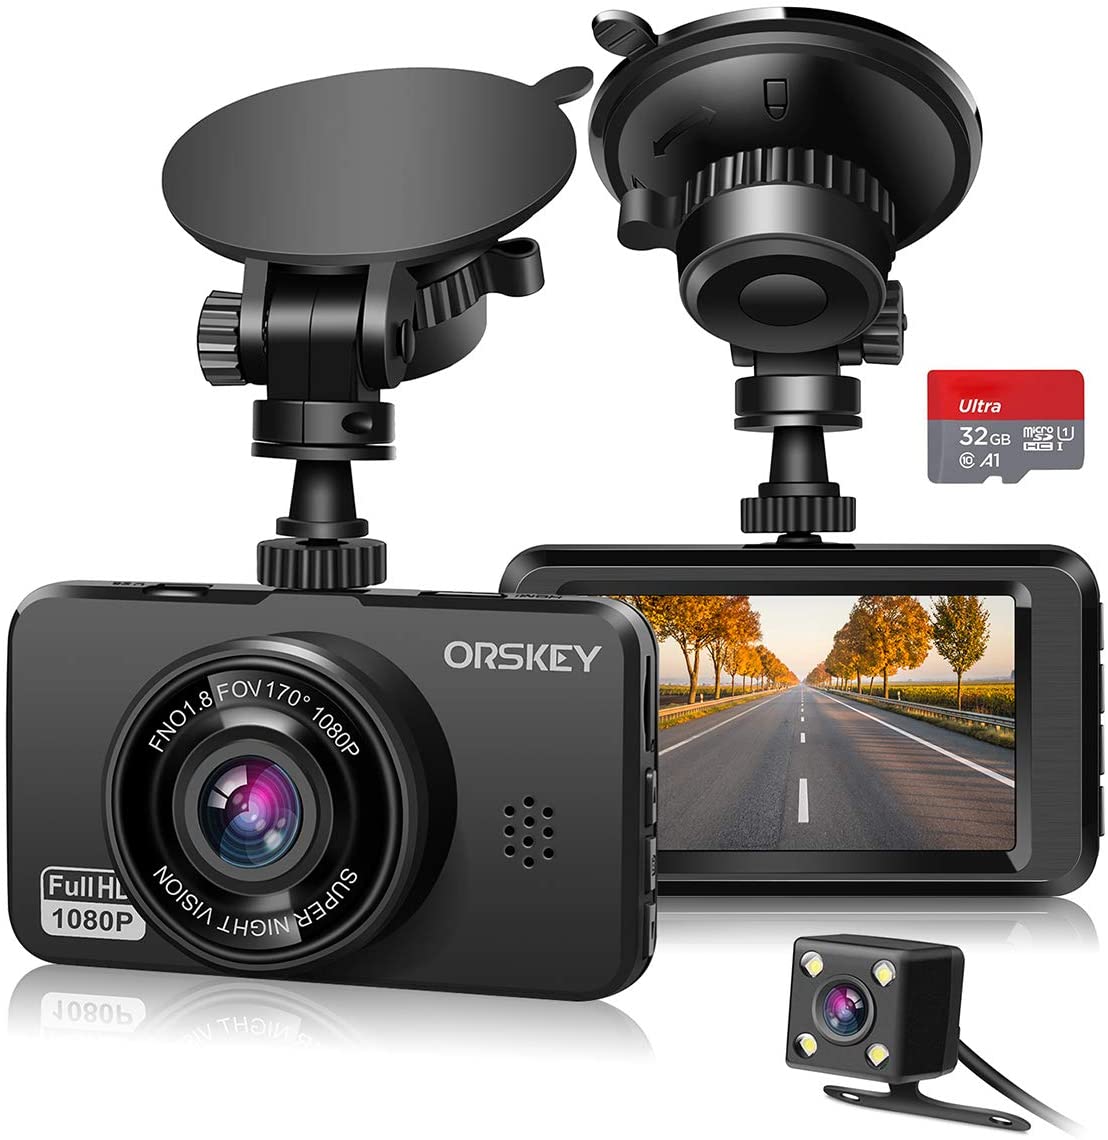 ORSKEY Dash Cam 1080P Full HD Car DVR Dashboard Camera Video Recorder in Car Camera Dashcam for Cars 170 Wide Angle WDR with 3.0 LCD Display Night Vision Motion Detection and G-Sensor 